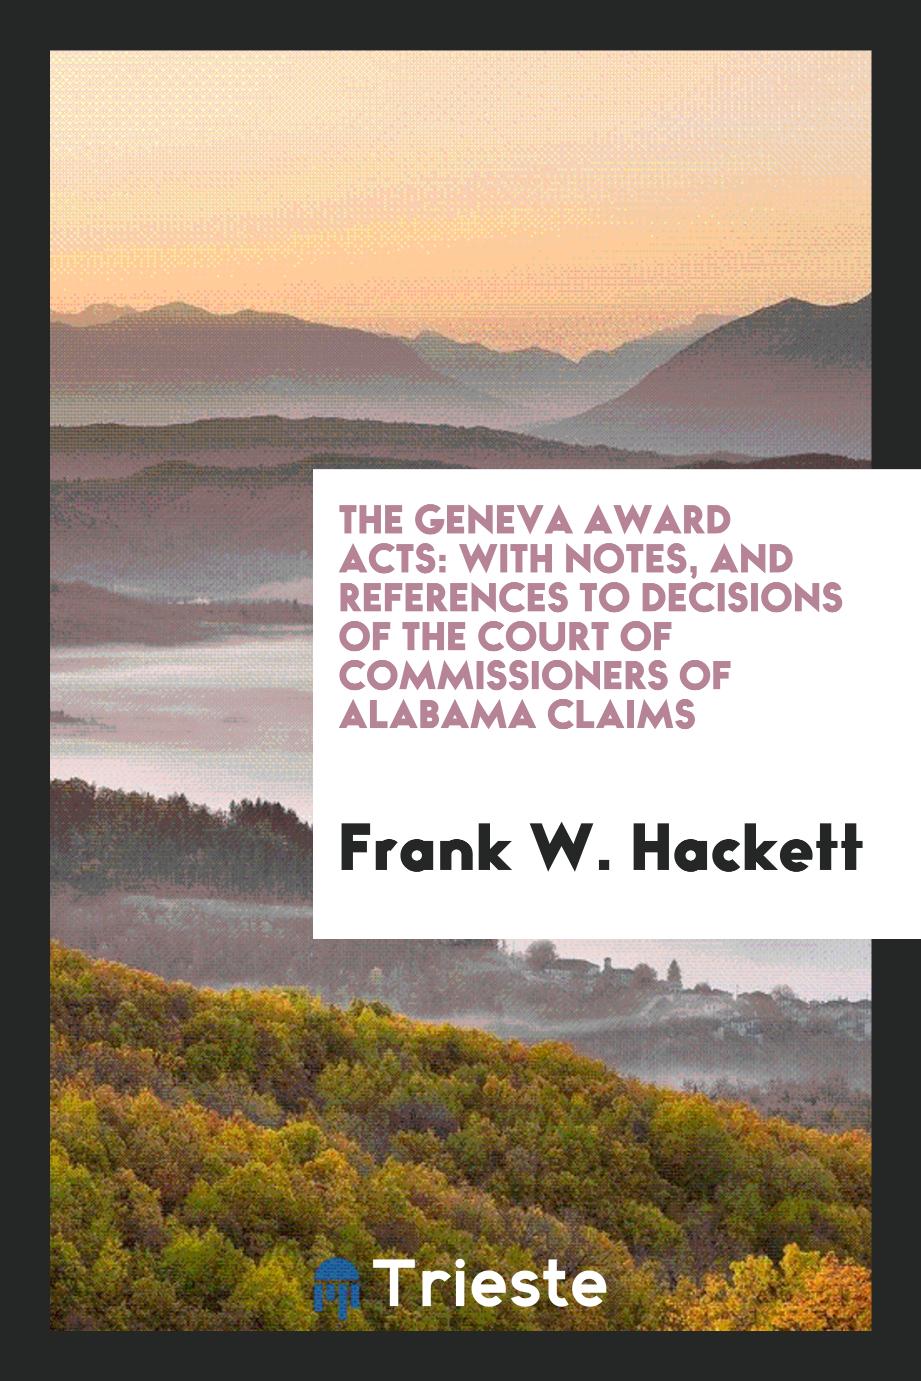 The Geneva Award Acts: With Notes, and References to Decisions of the Court of Commissioners of Alabama Claims